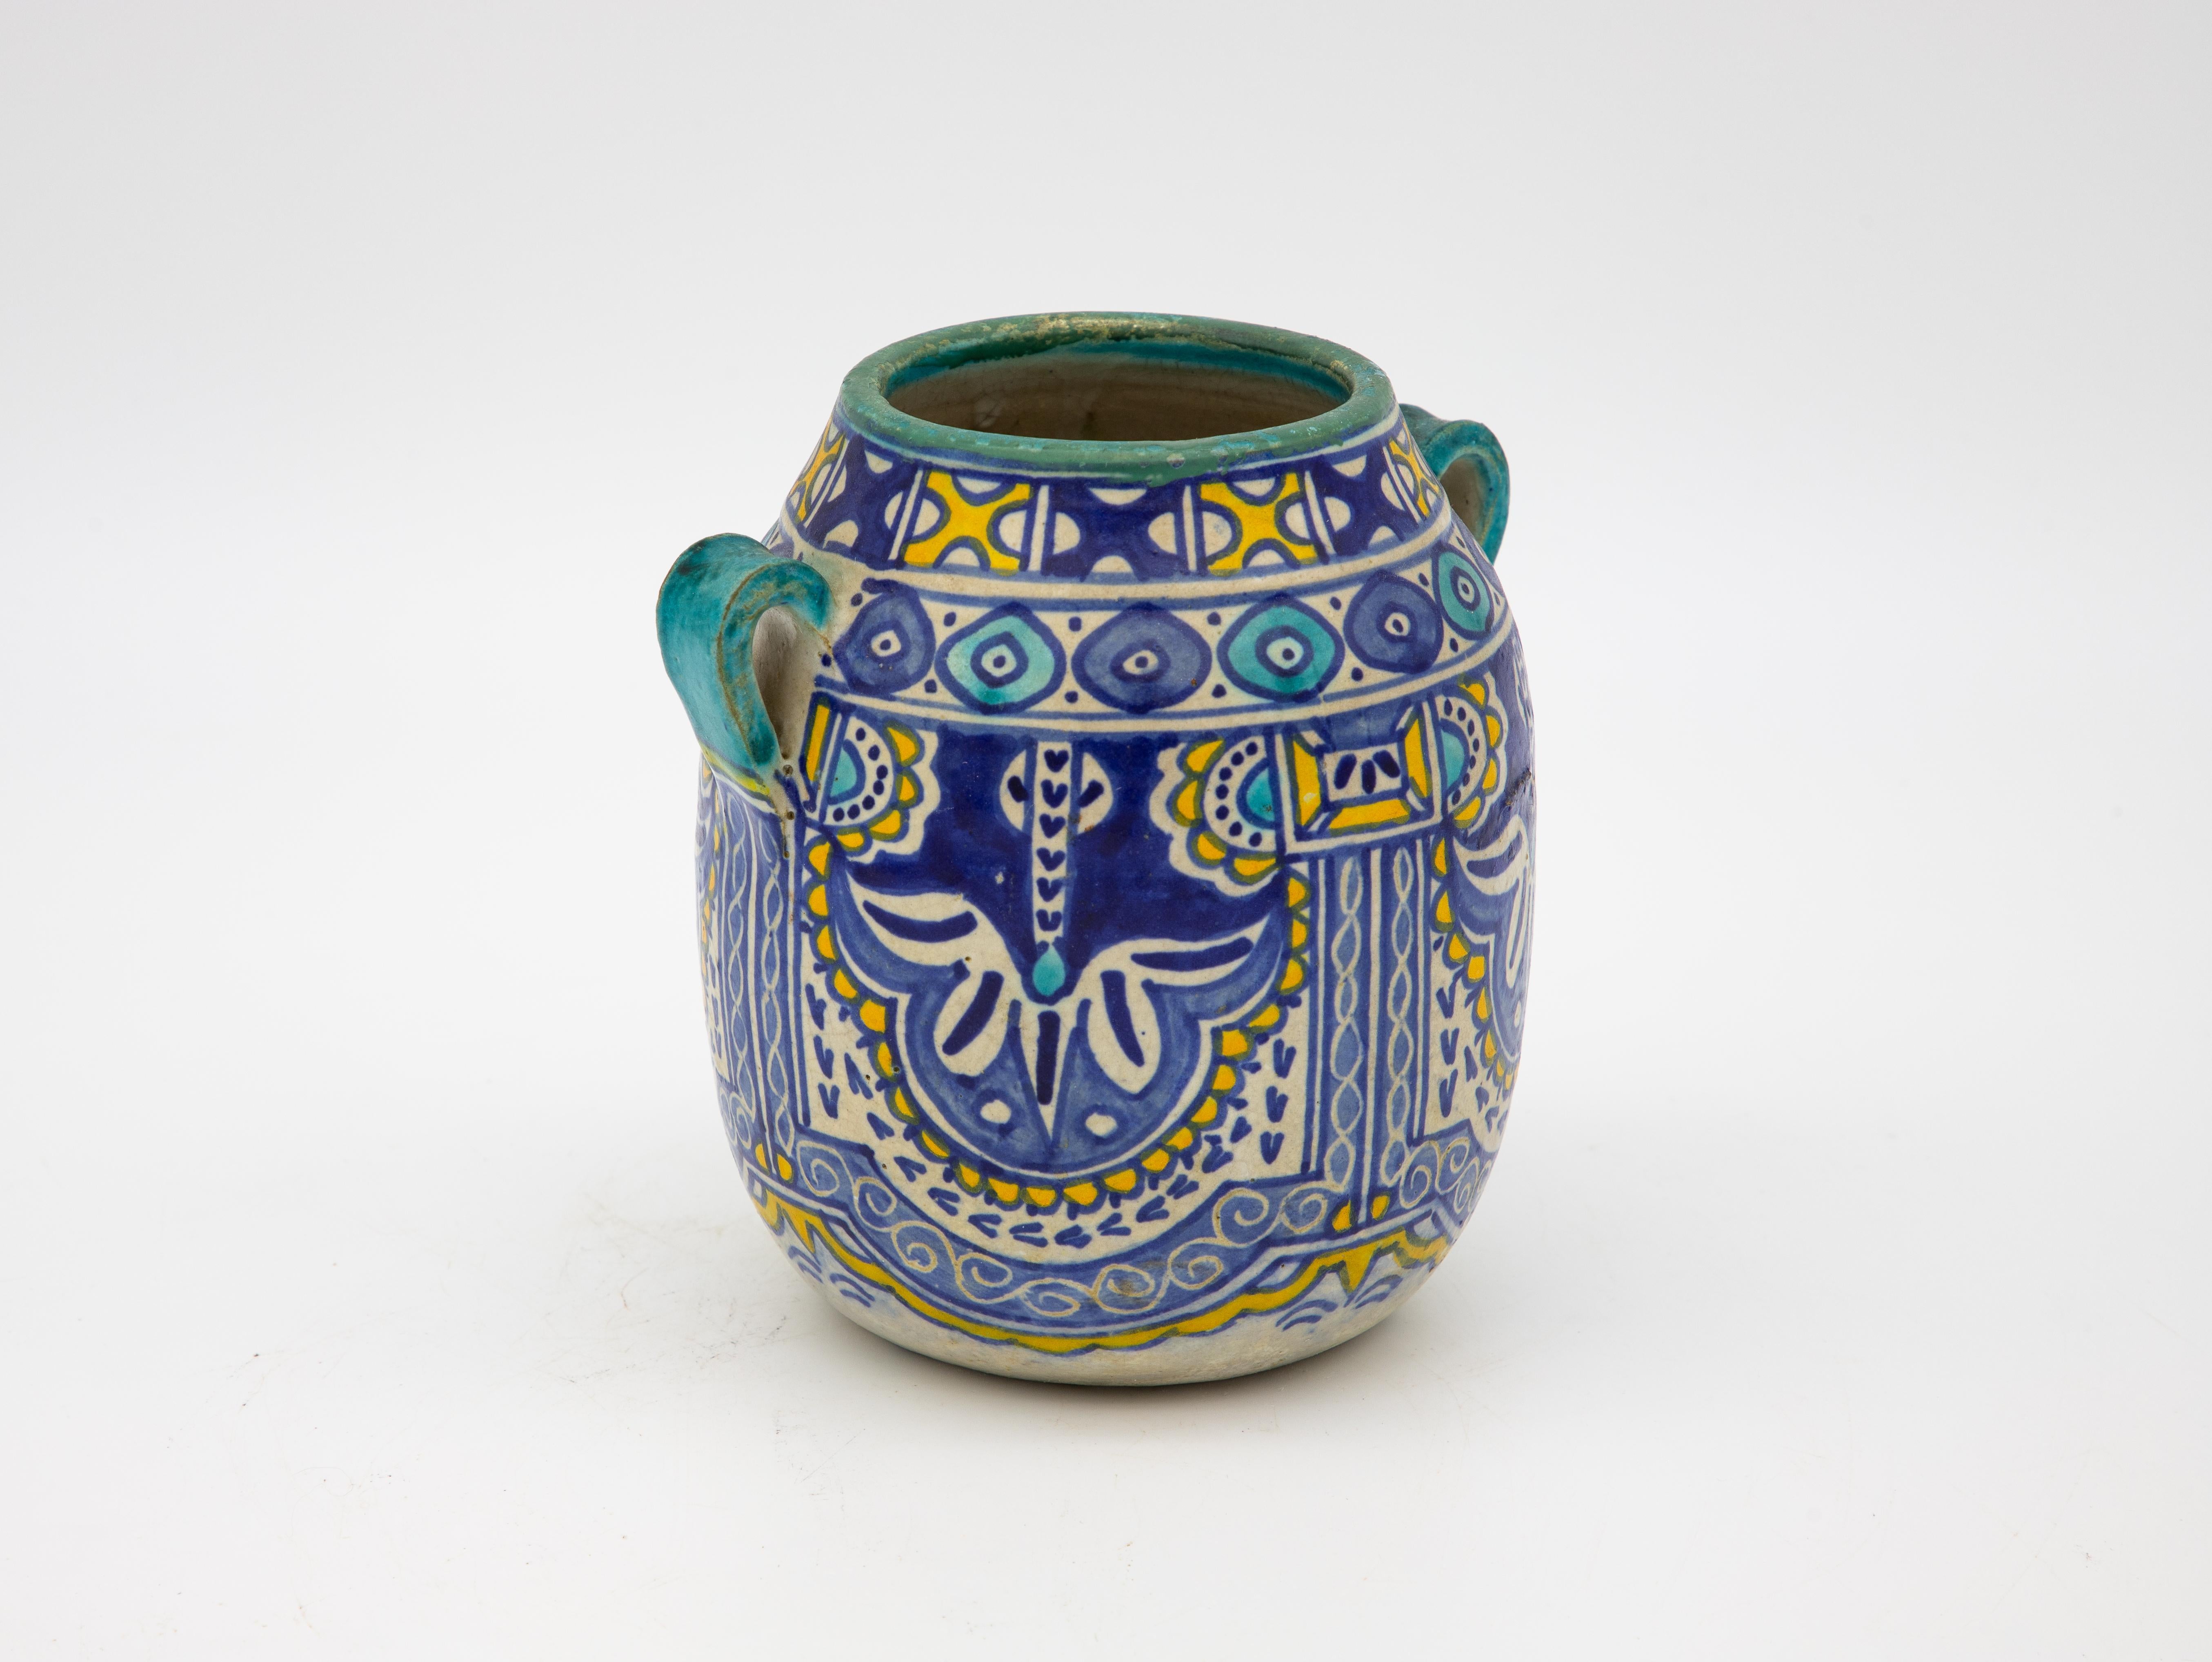 An early 20th century vase from Fes, Morocco. Typical bright colors of cobalt, turquoise, and saffron. Two handles and an open mouth. Wear consistent with age and use.